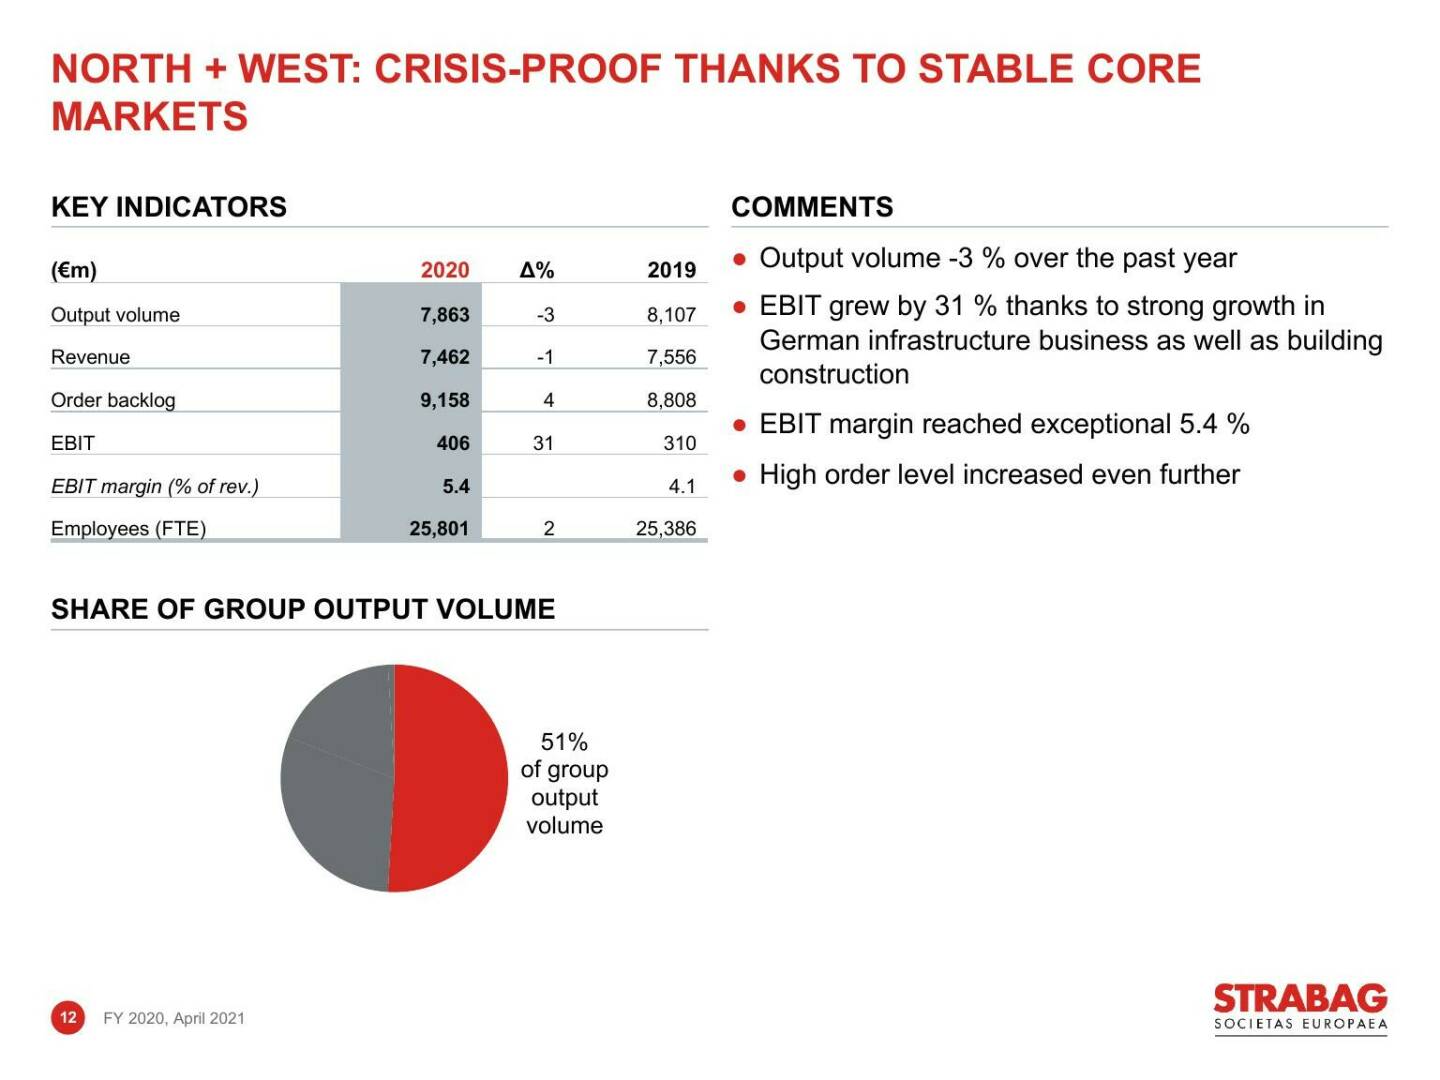 Strabag - North + west: crisis-proof thanks to stable core markets